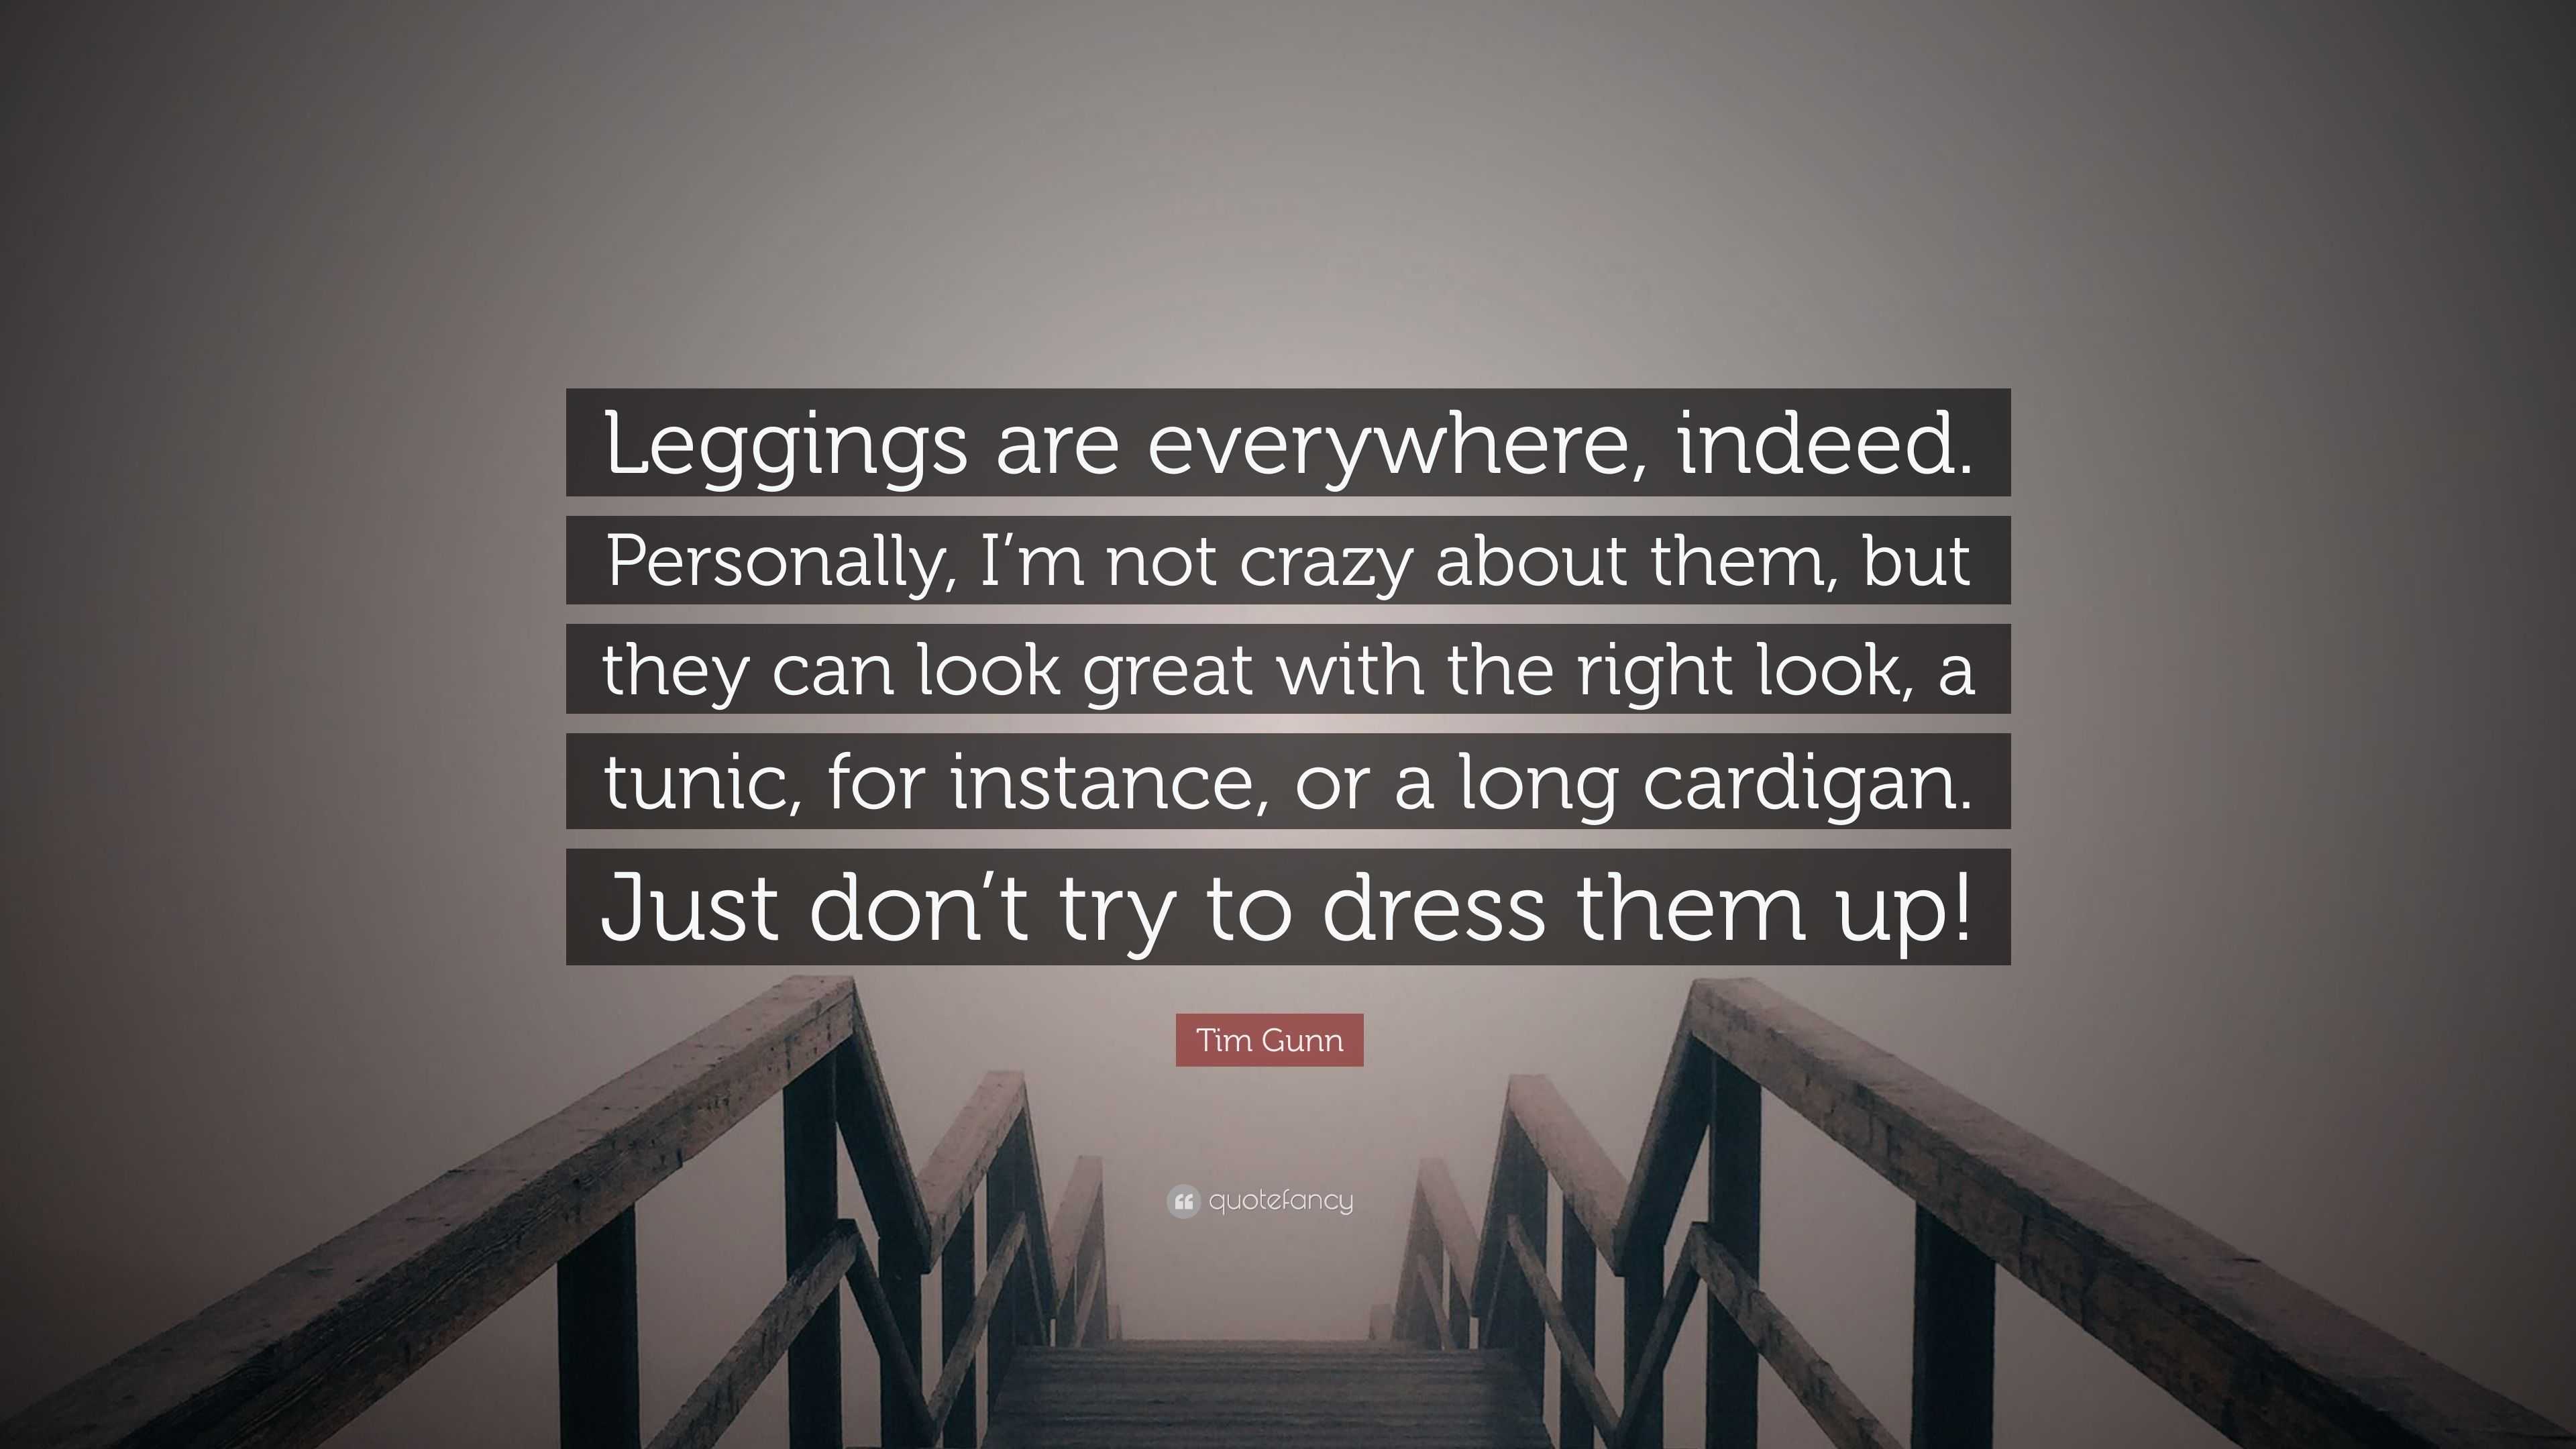 https://quotefancy.com/media/wallpaper/3840x2160/4164604-Tim-Gunn-Quote-Leggings-are-everywhere-indeed-Personally-I-m-not.jpg